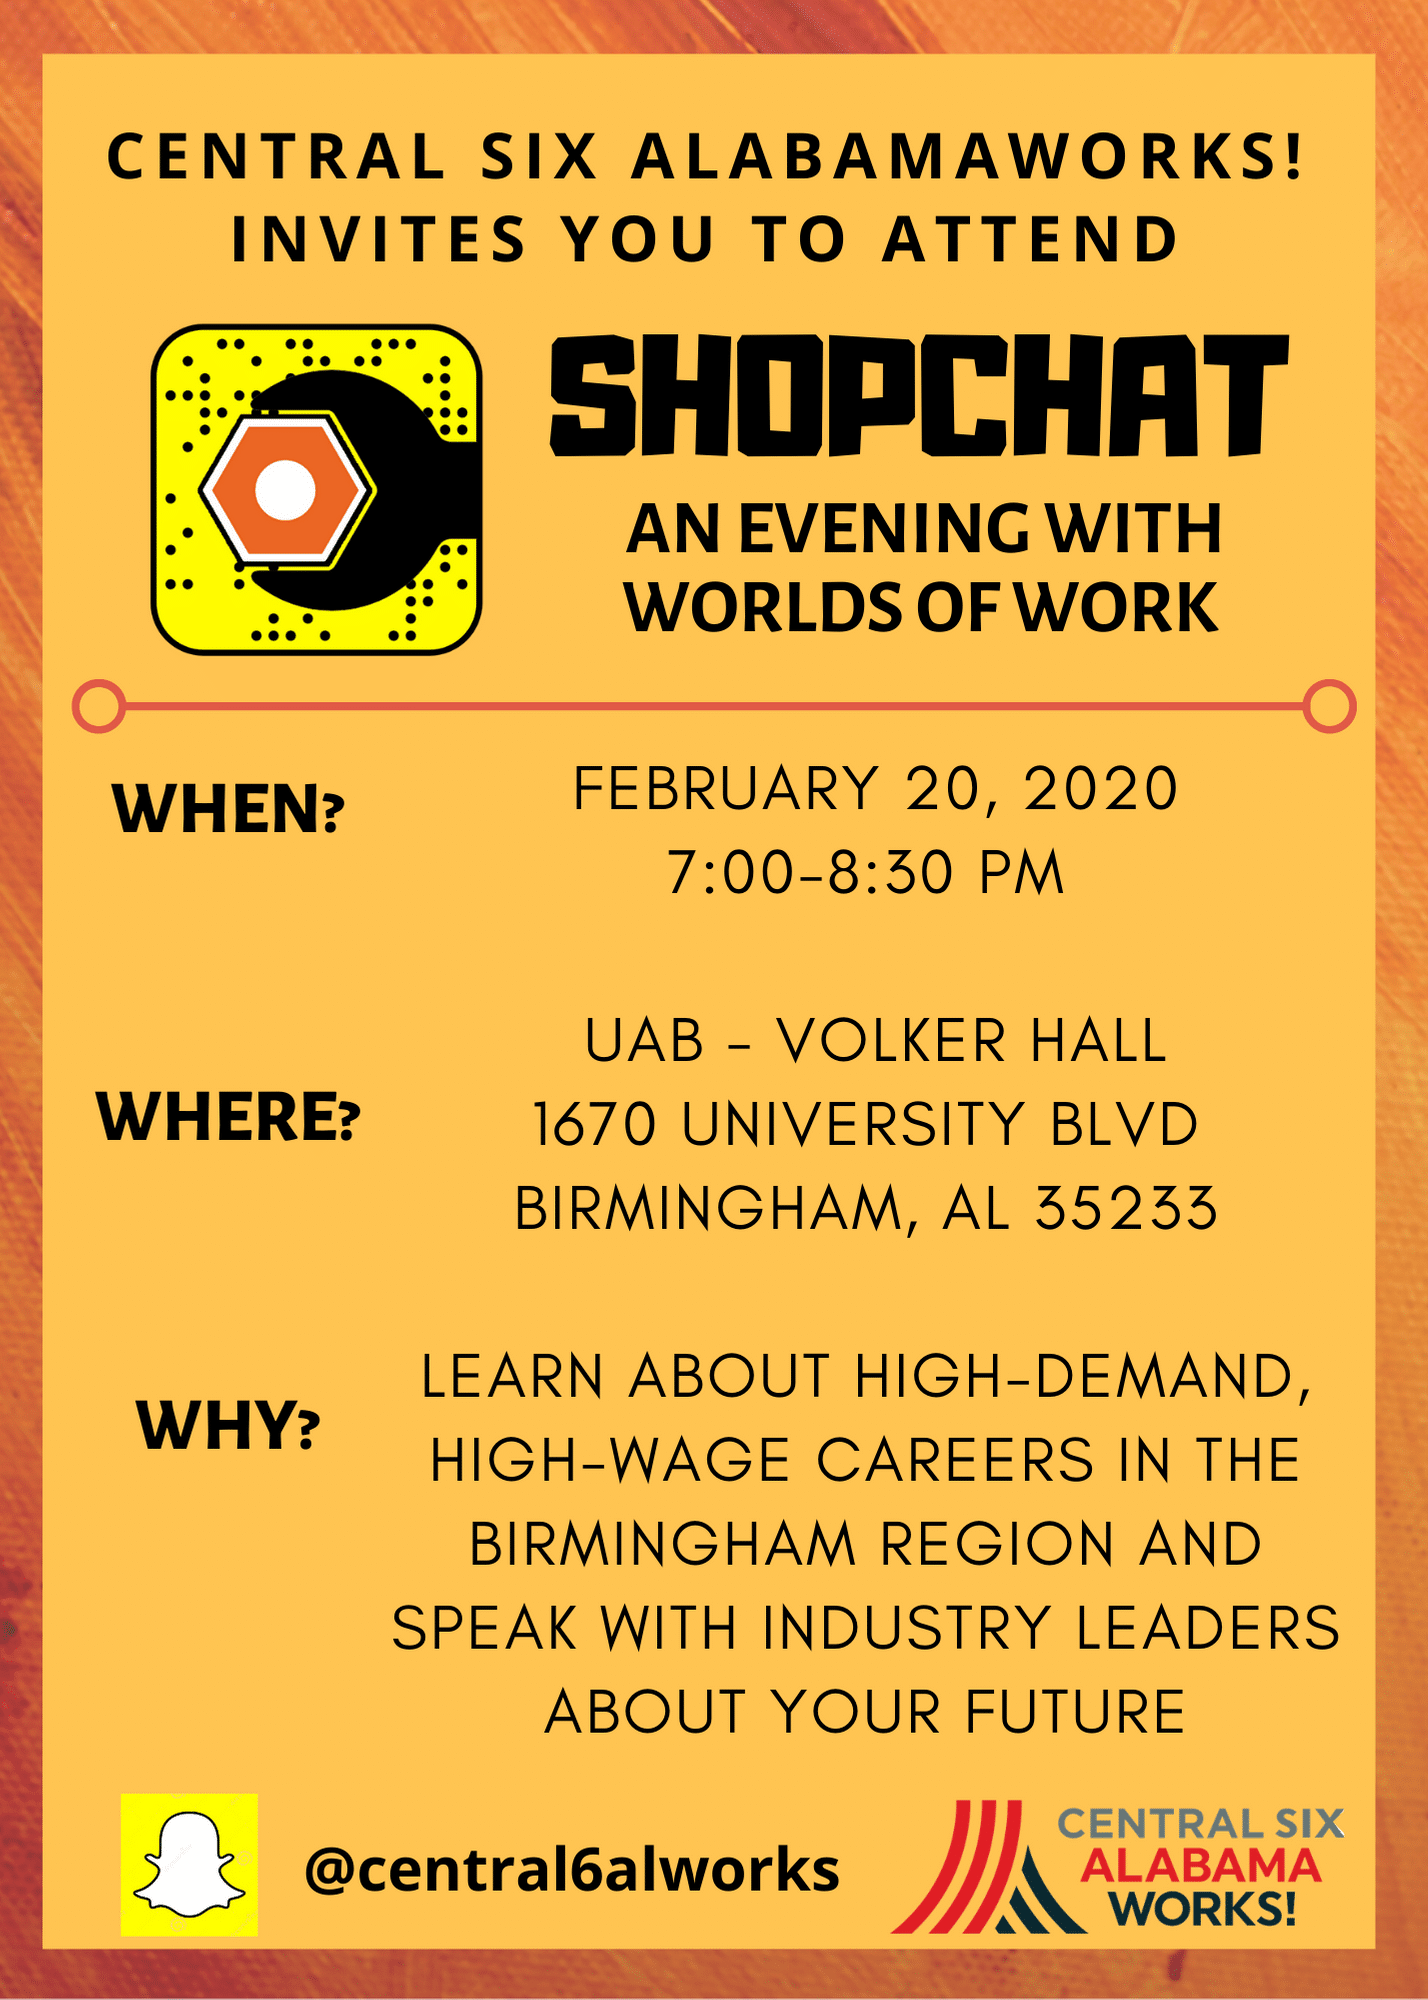 Shopchat an evening with worlds of work Parent alert! Bring your 8-12 graders to learn about high-wage, high-demand careers in Birmingham.